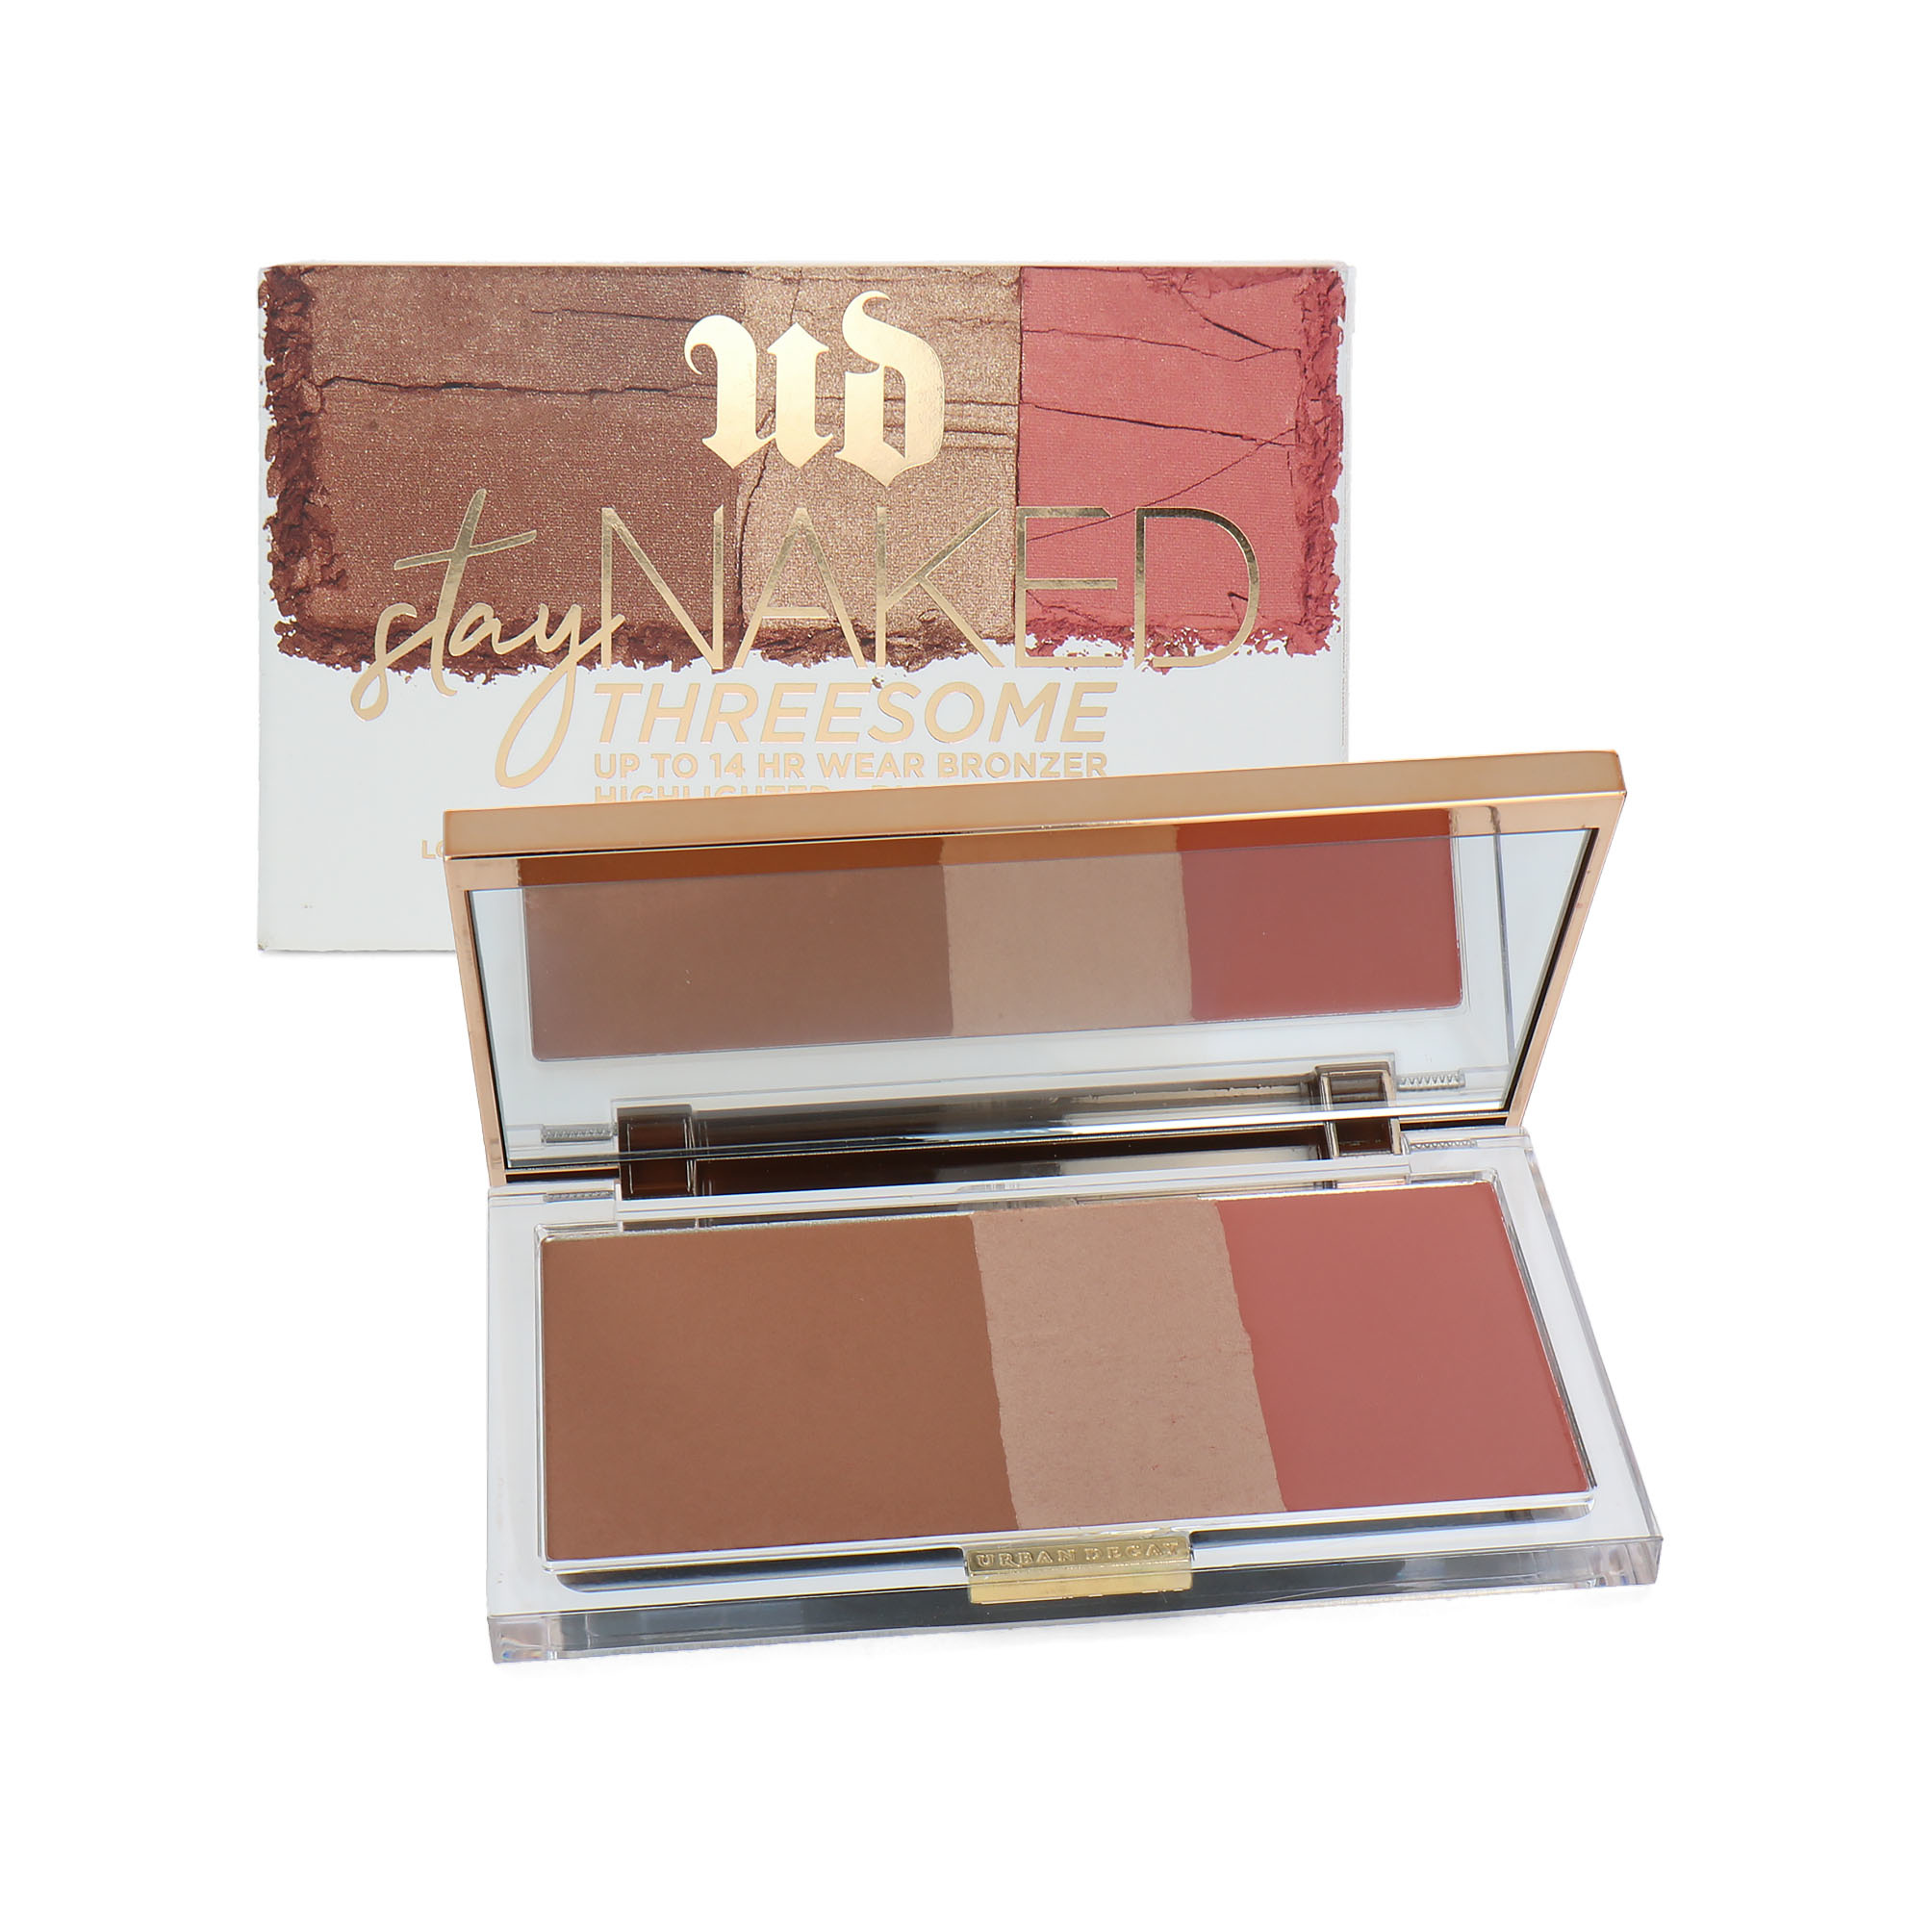 Urban Decay Stay Naked Threesome Bronzer-Highlighter-Blush